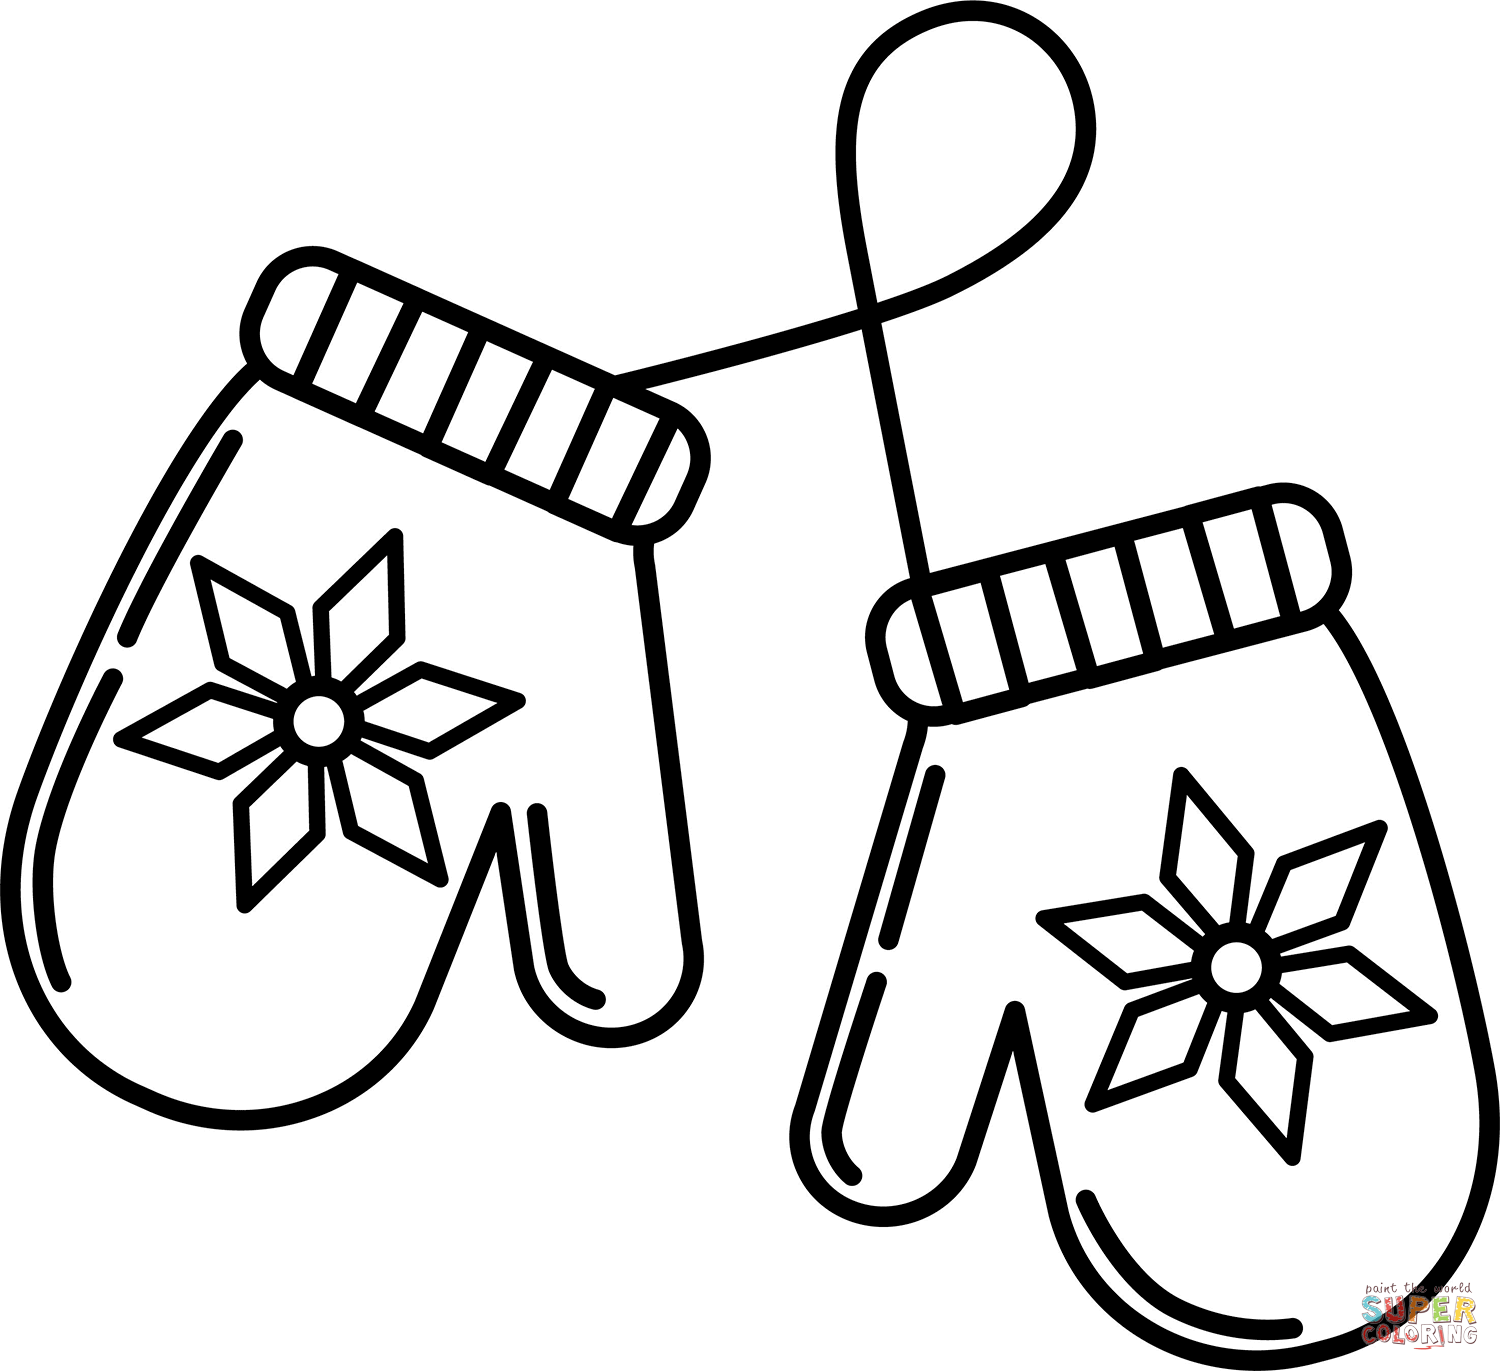 Mittens coloring page free printable coloring pages